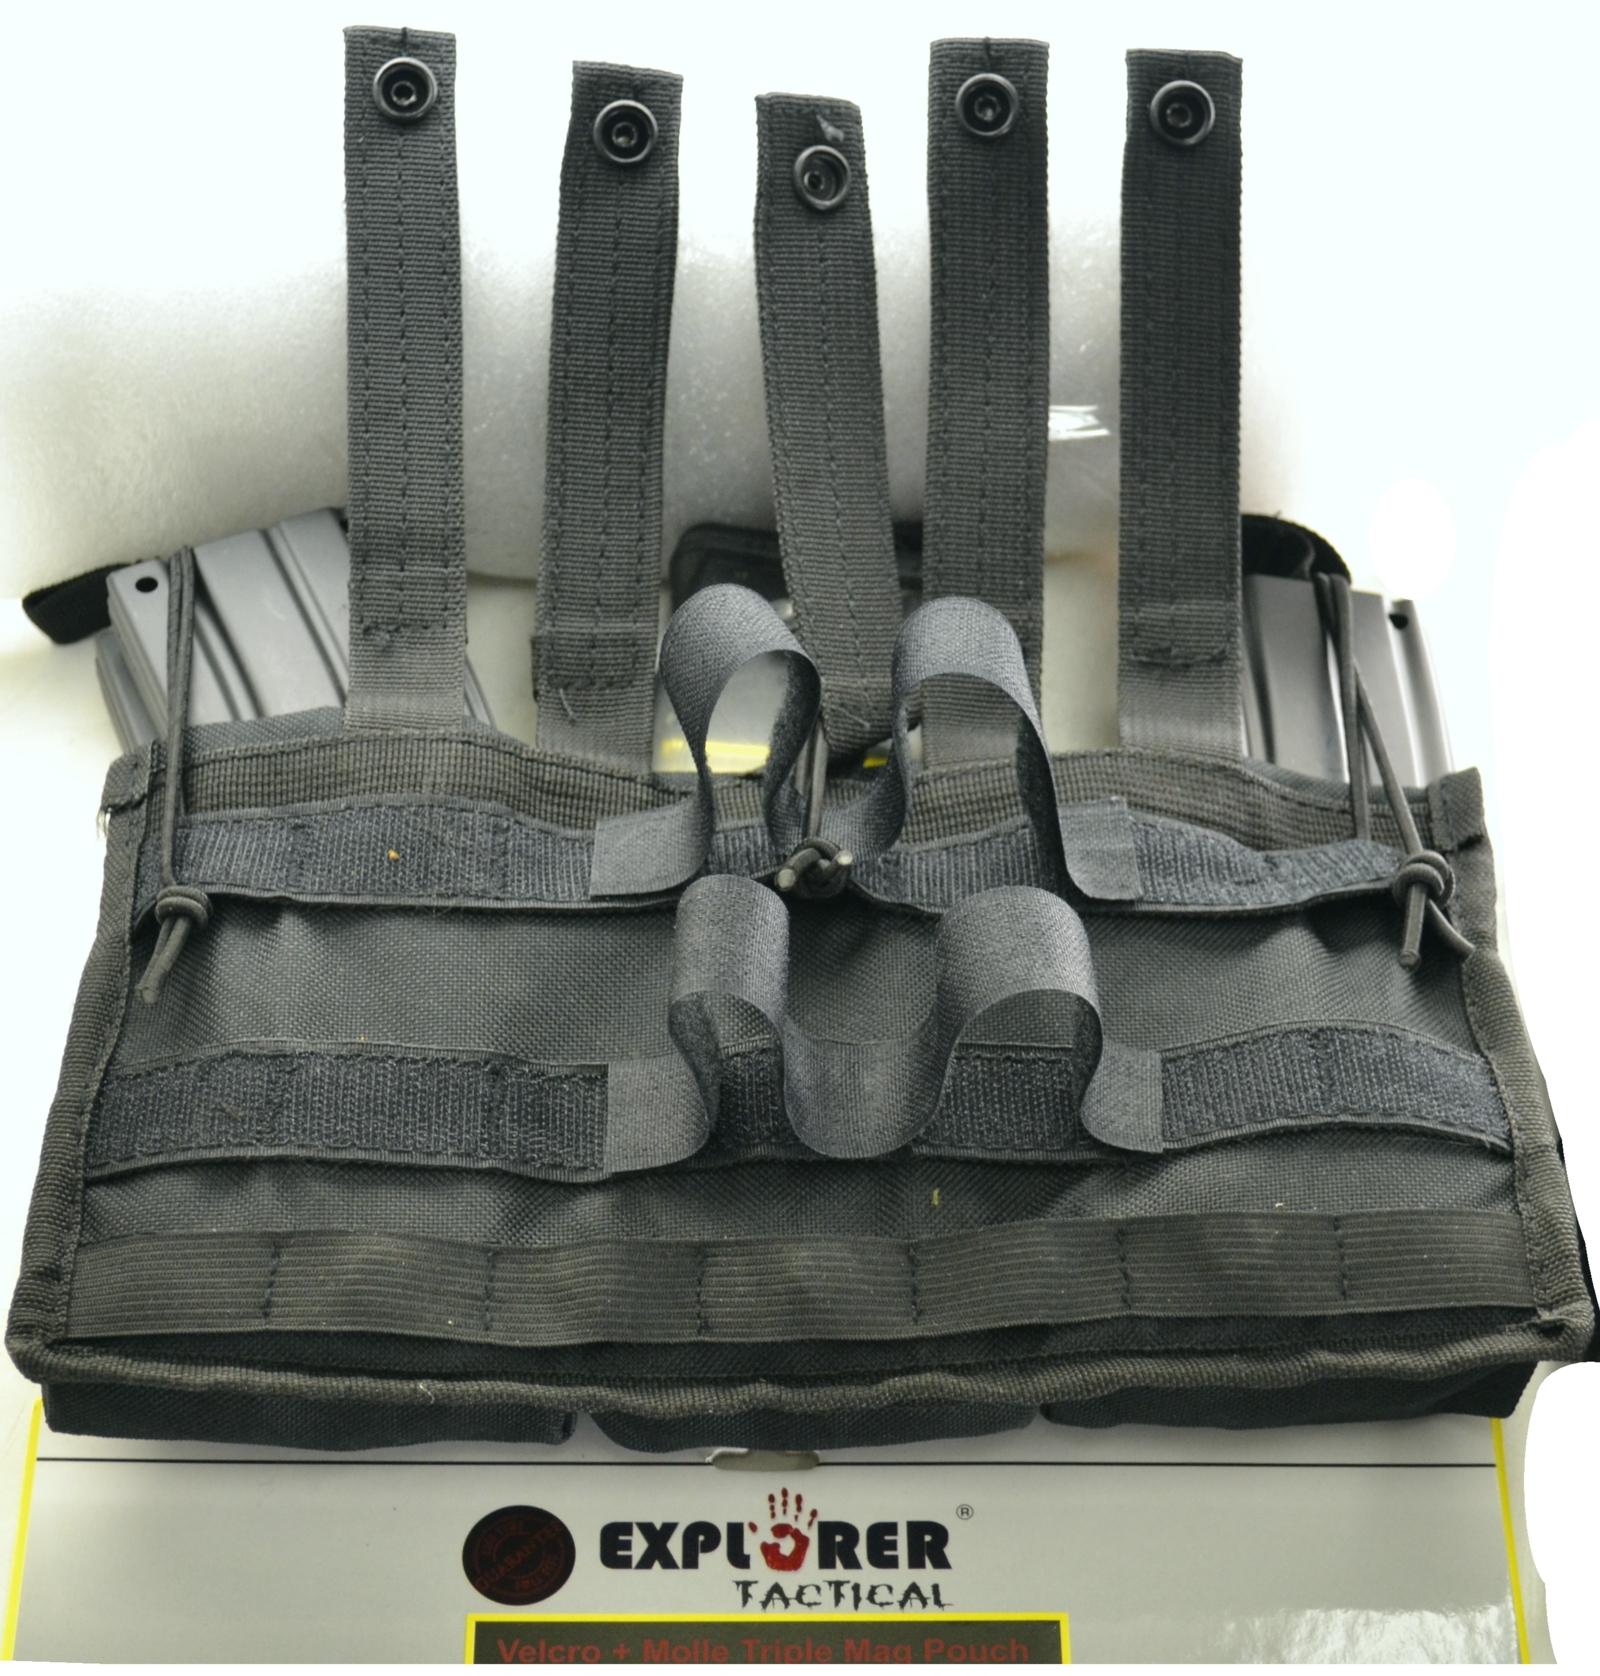 P11, P53 Single Mag Pouch elcro mag holder with finger tab for easy access M.O.L.L.E straps Drain holes Extra Velcro at back for us inside your backpack or gun case